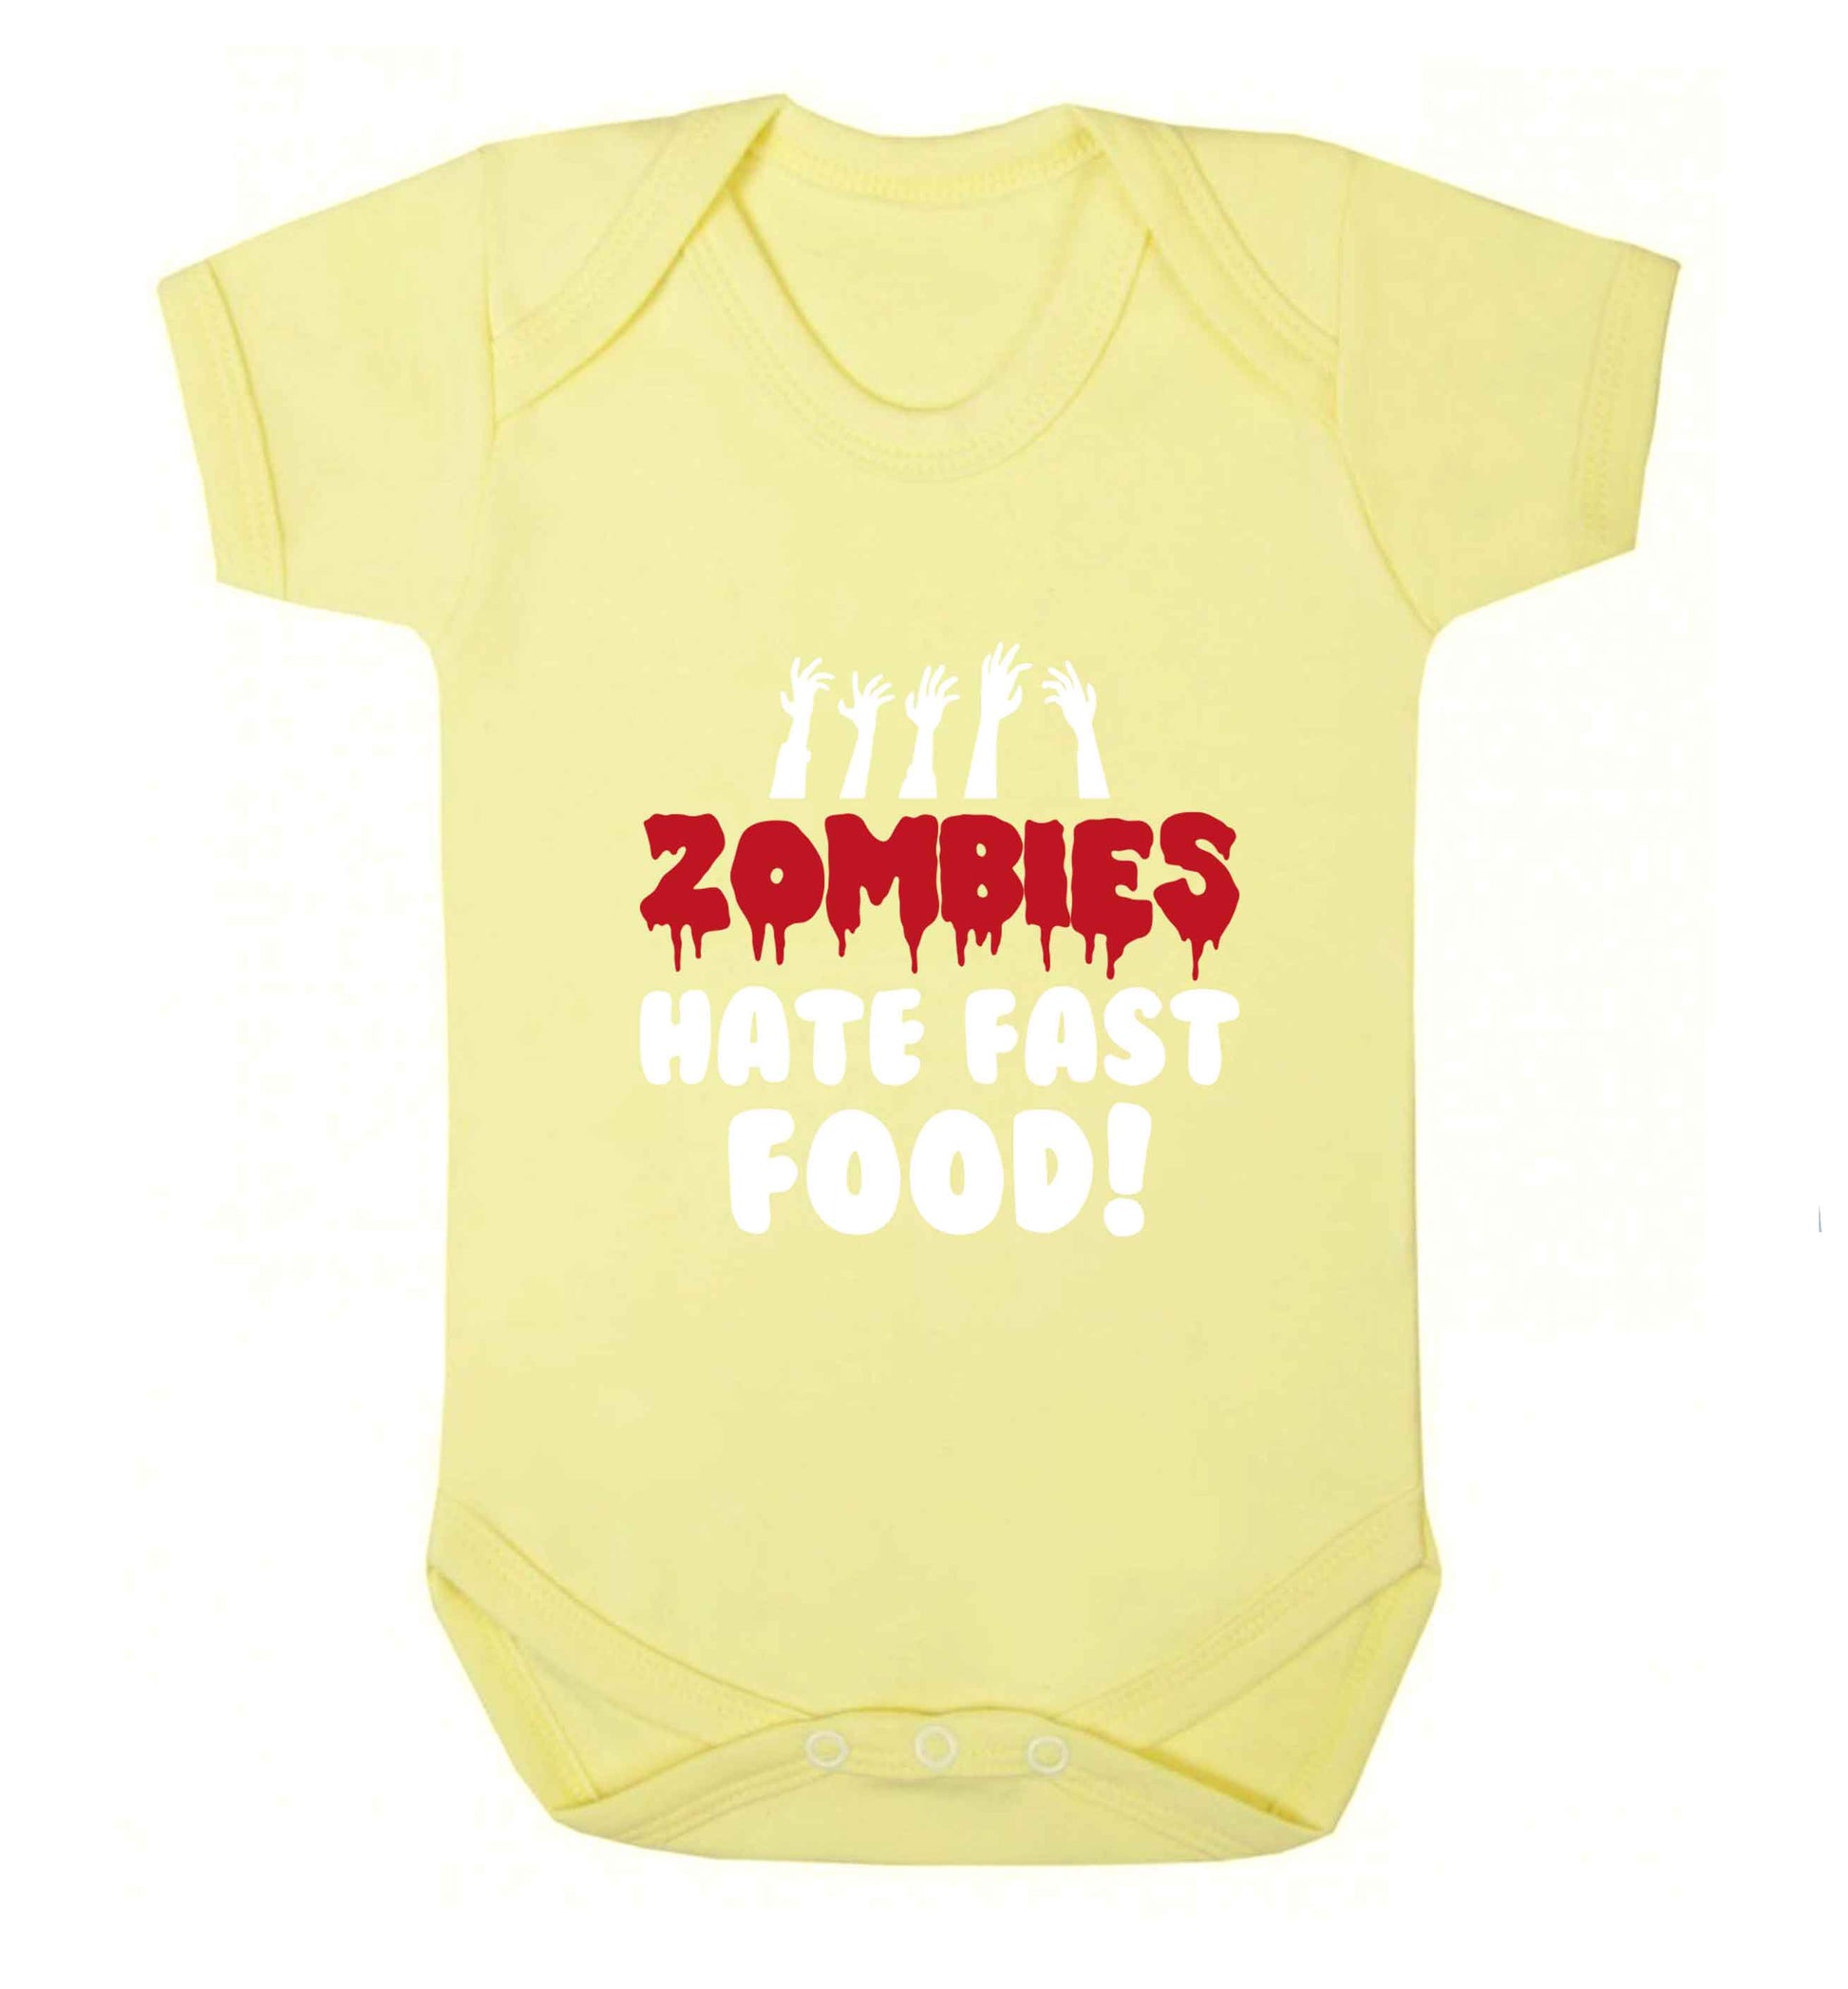 Zombies hate fast food baby vest pale yellow 18-24 months